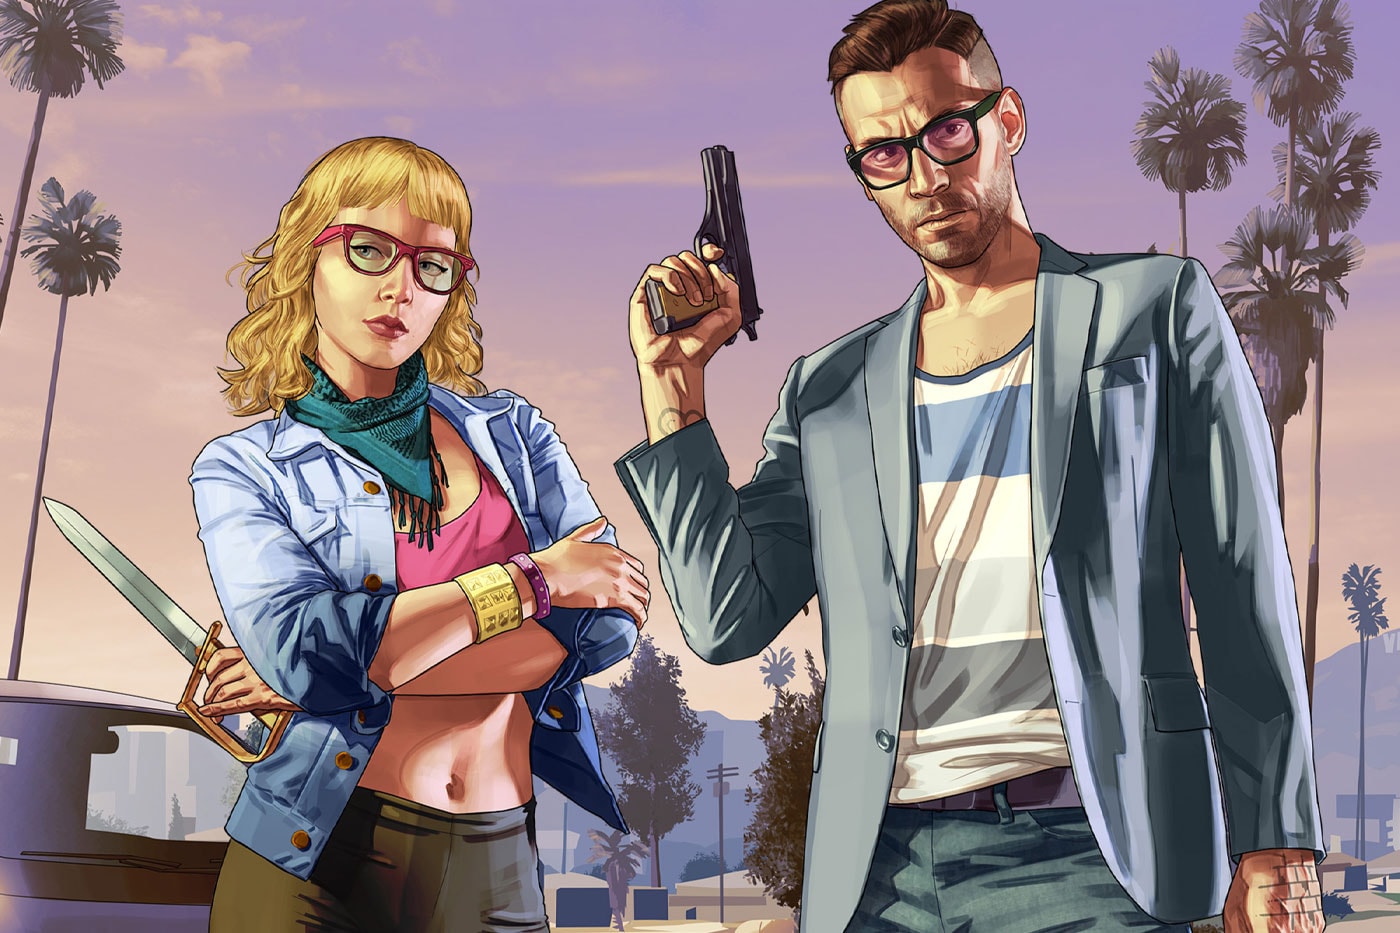 Head of Take-Two: GTA VI will be a revolution in the video game industry